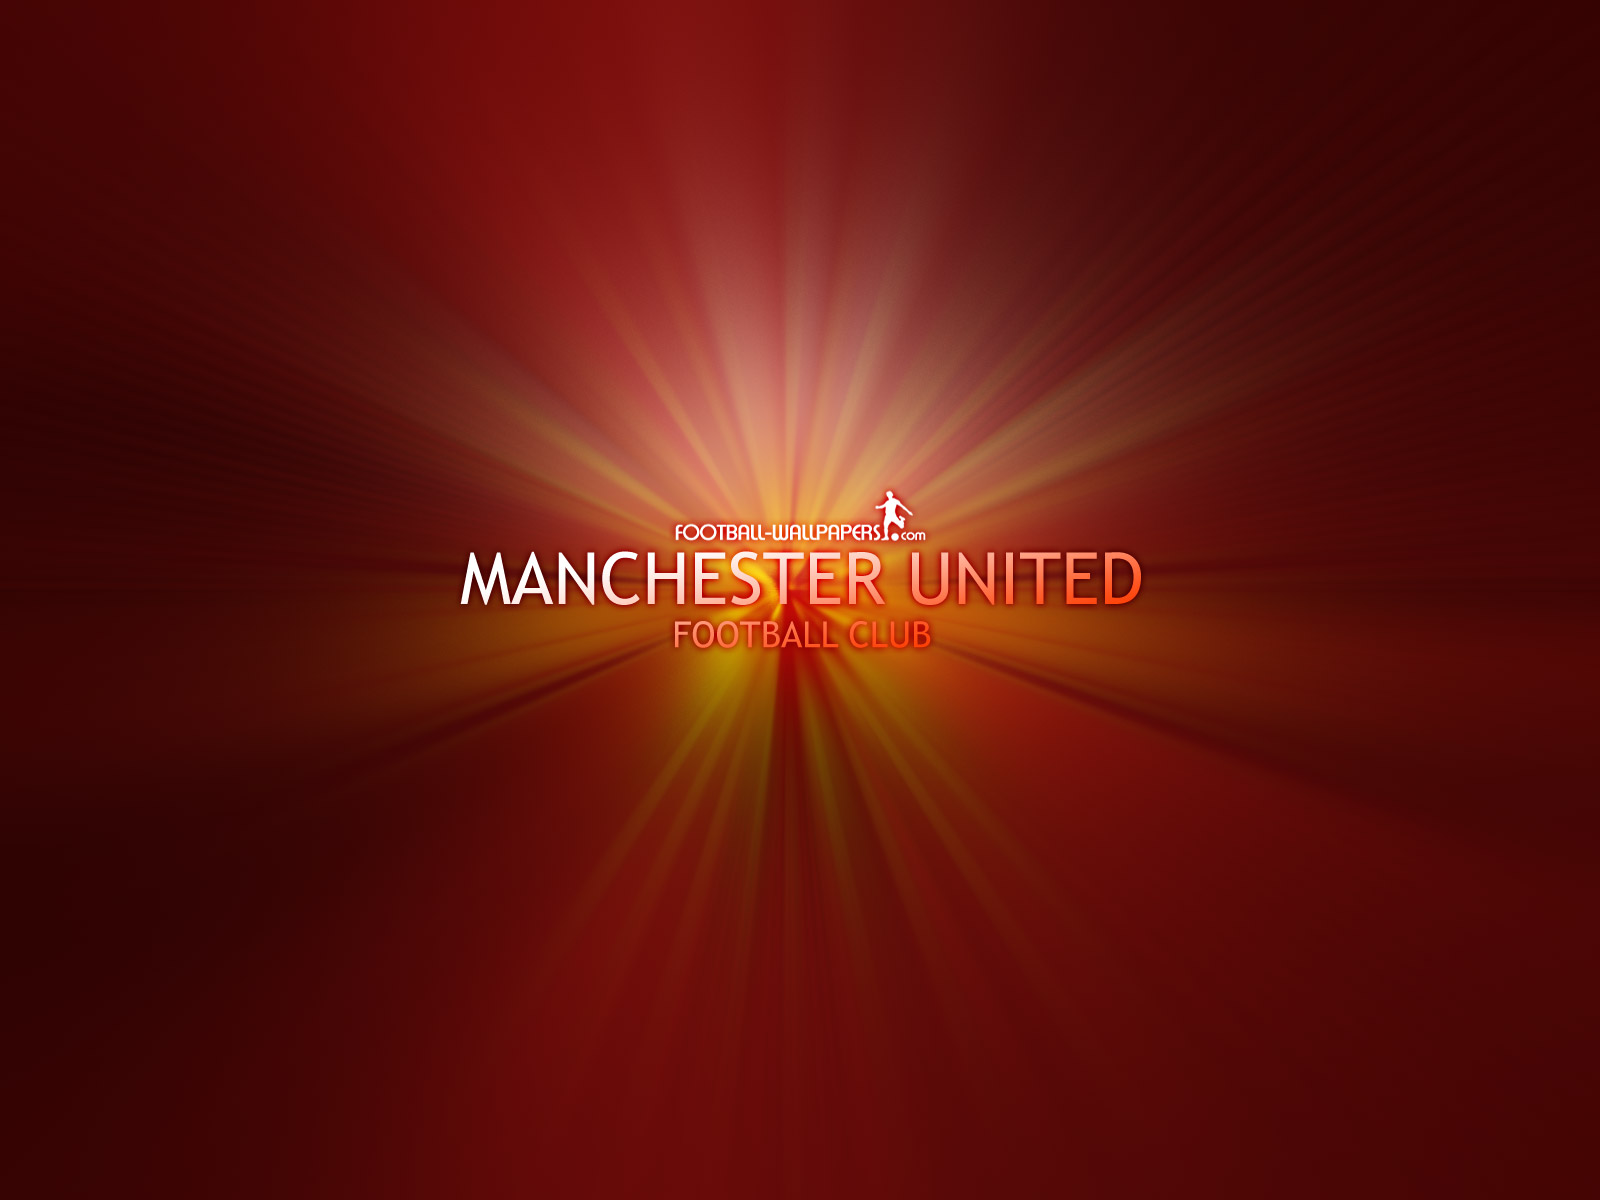 Manchester United Wallpaper HD Background Photos